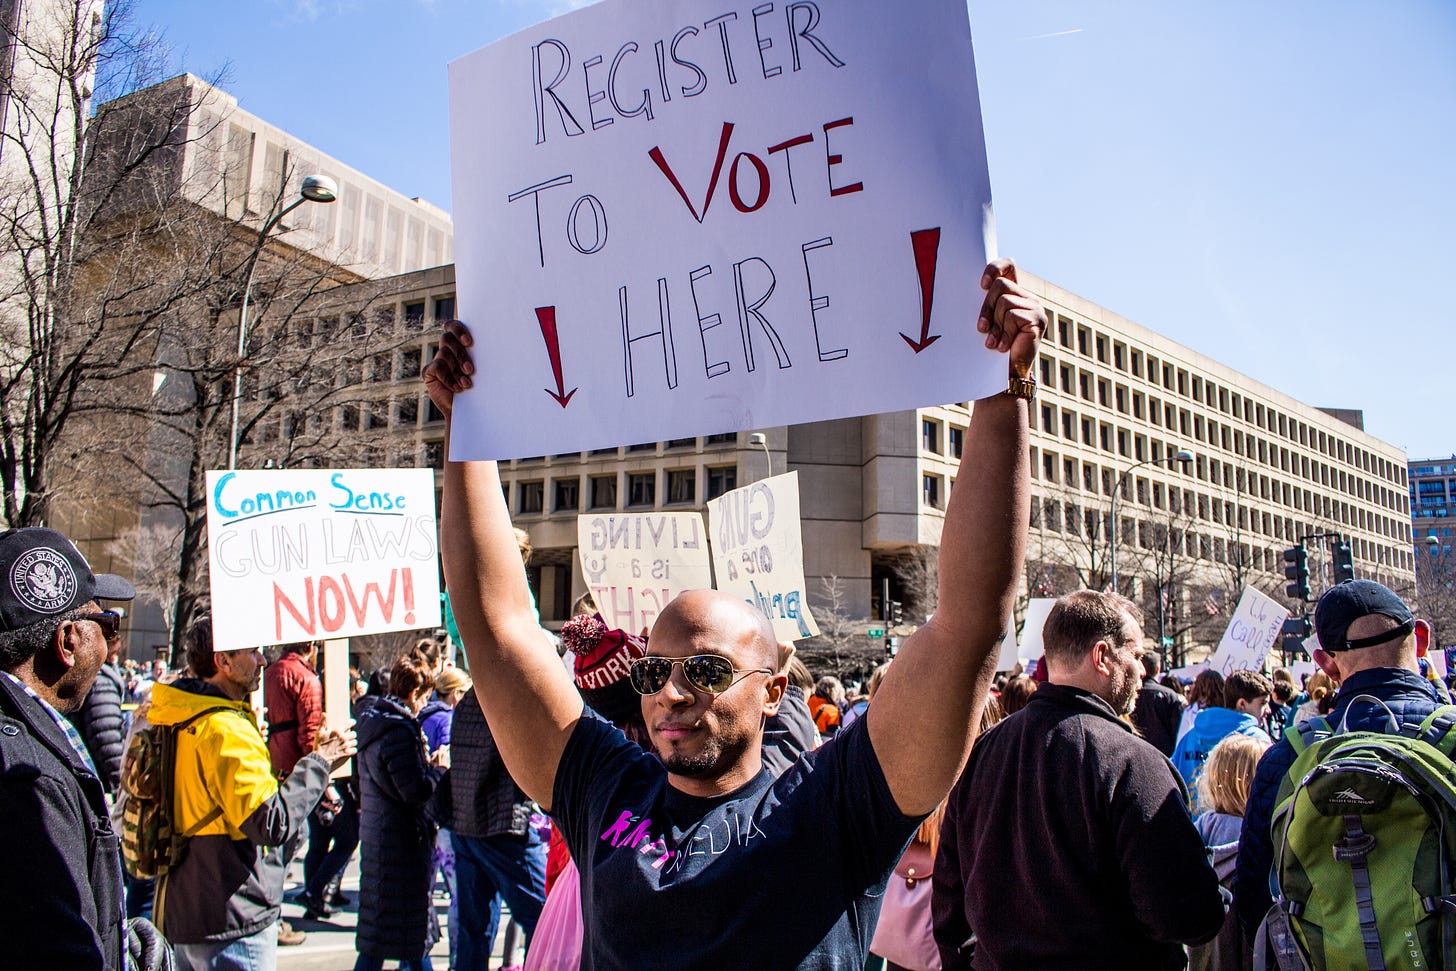 A photo of Ahmed Baba holding up a "Register To Vote Here" sign at the March of Our Lives in 2018